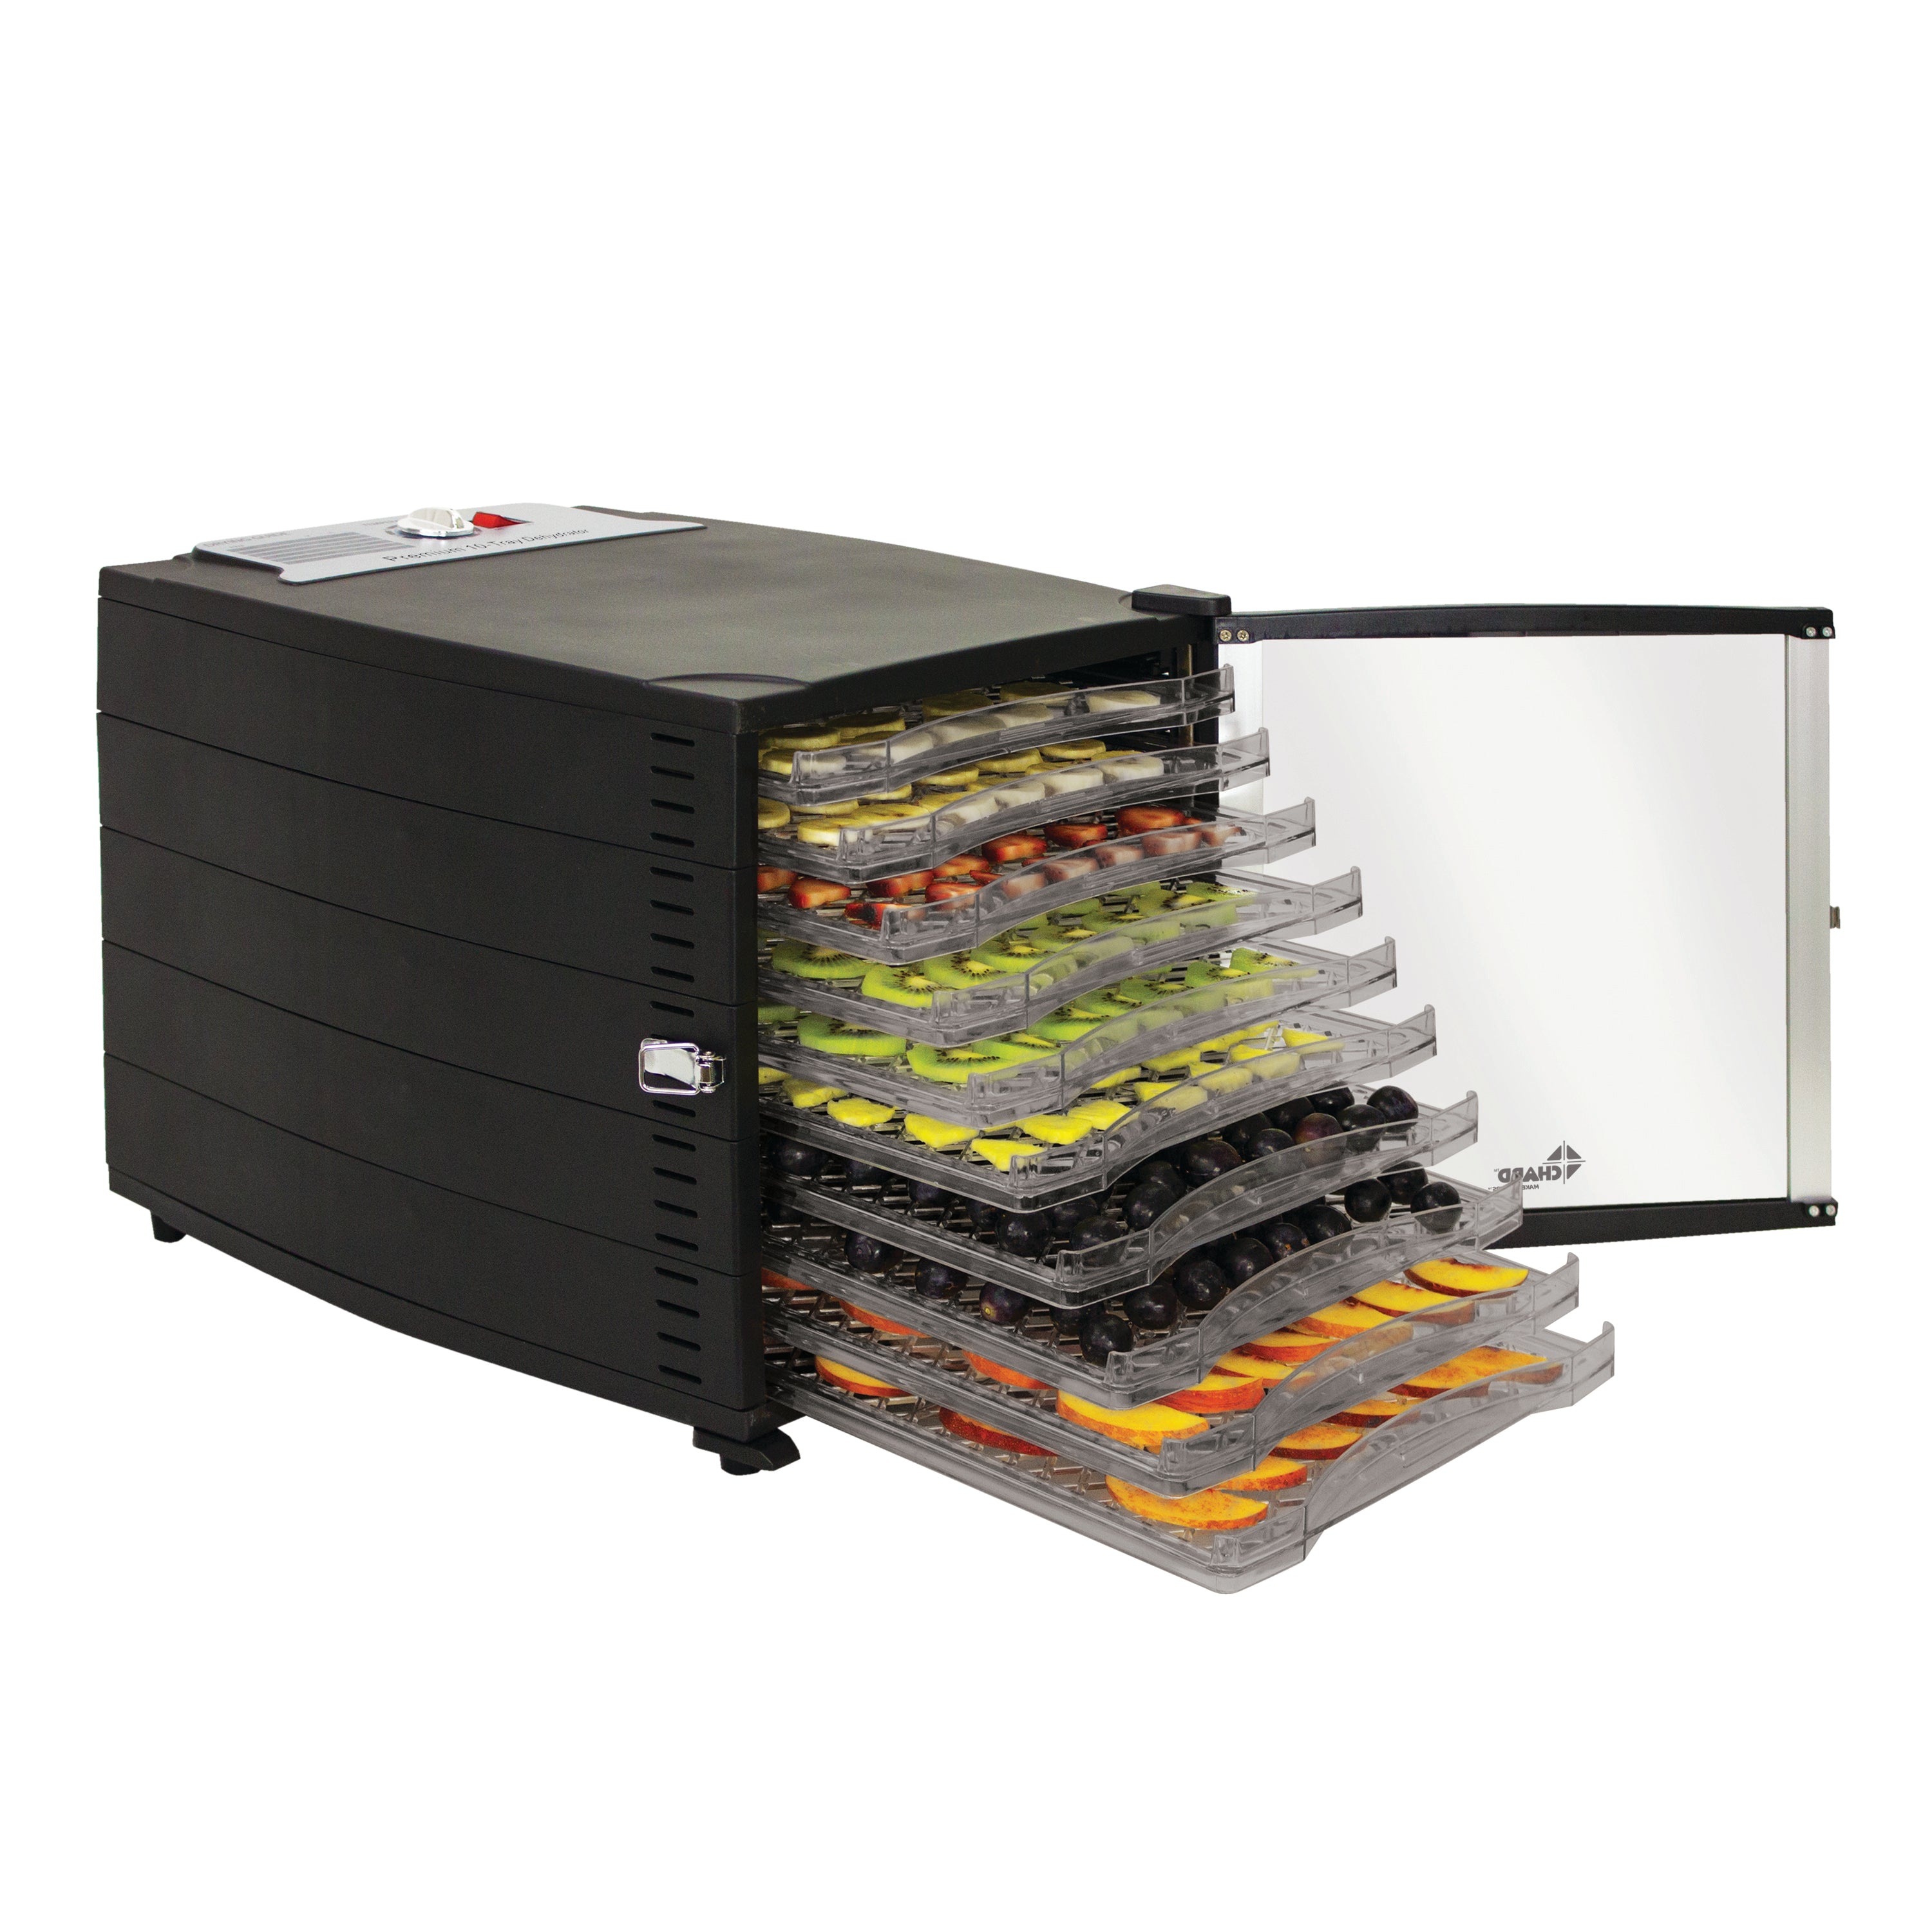 CABELA'S 12 TRAY PRO SERIES DEHYDRATOR for Sale in